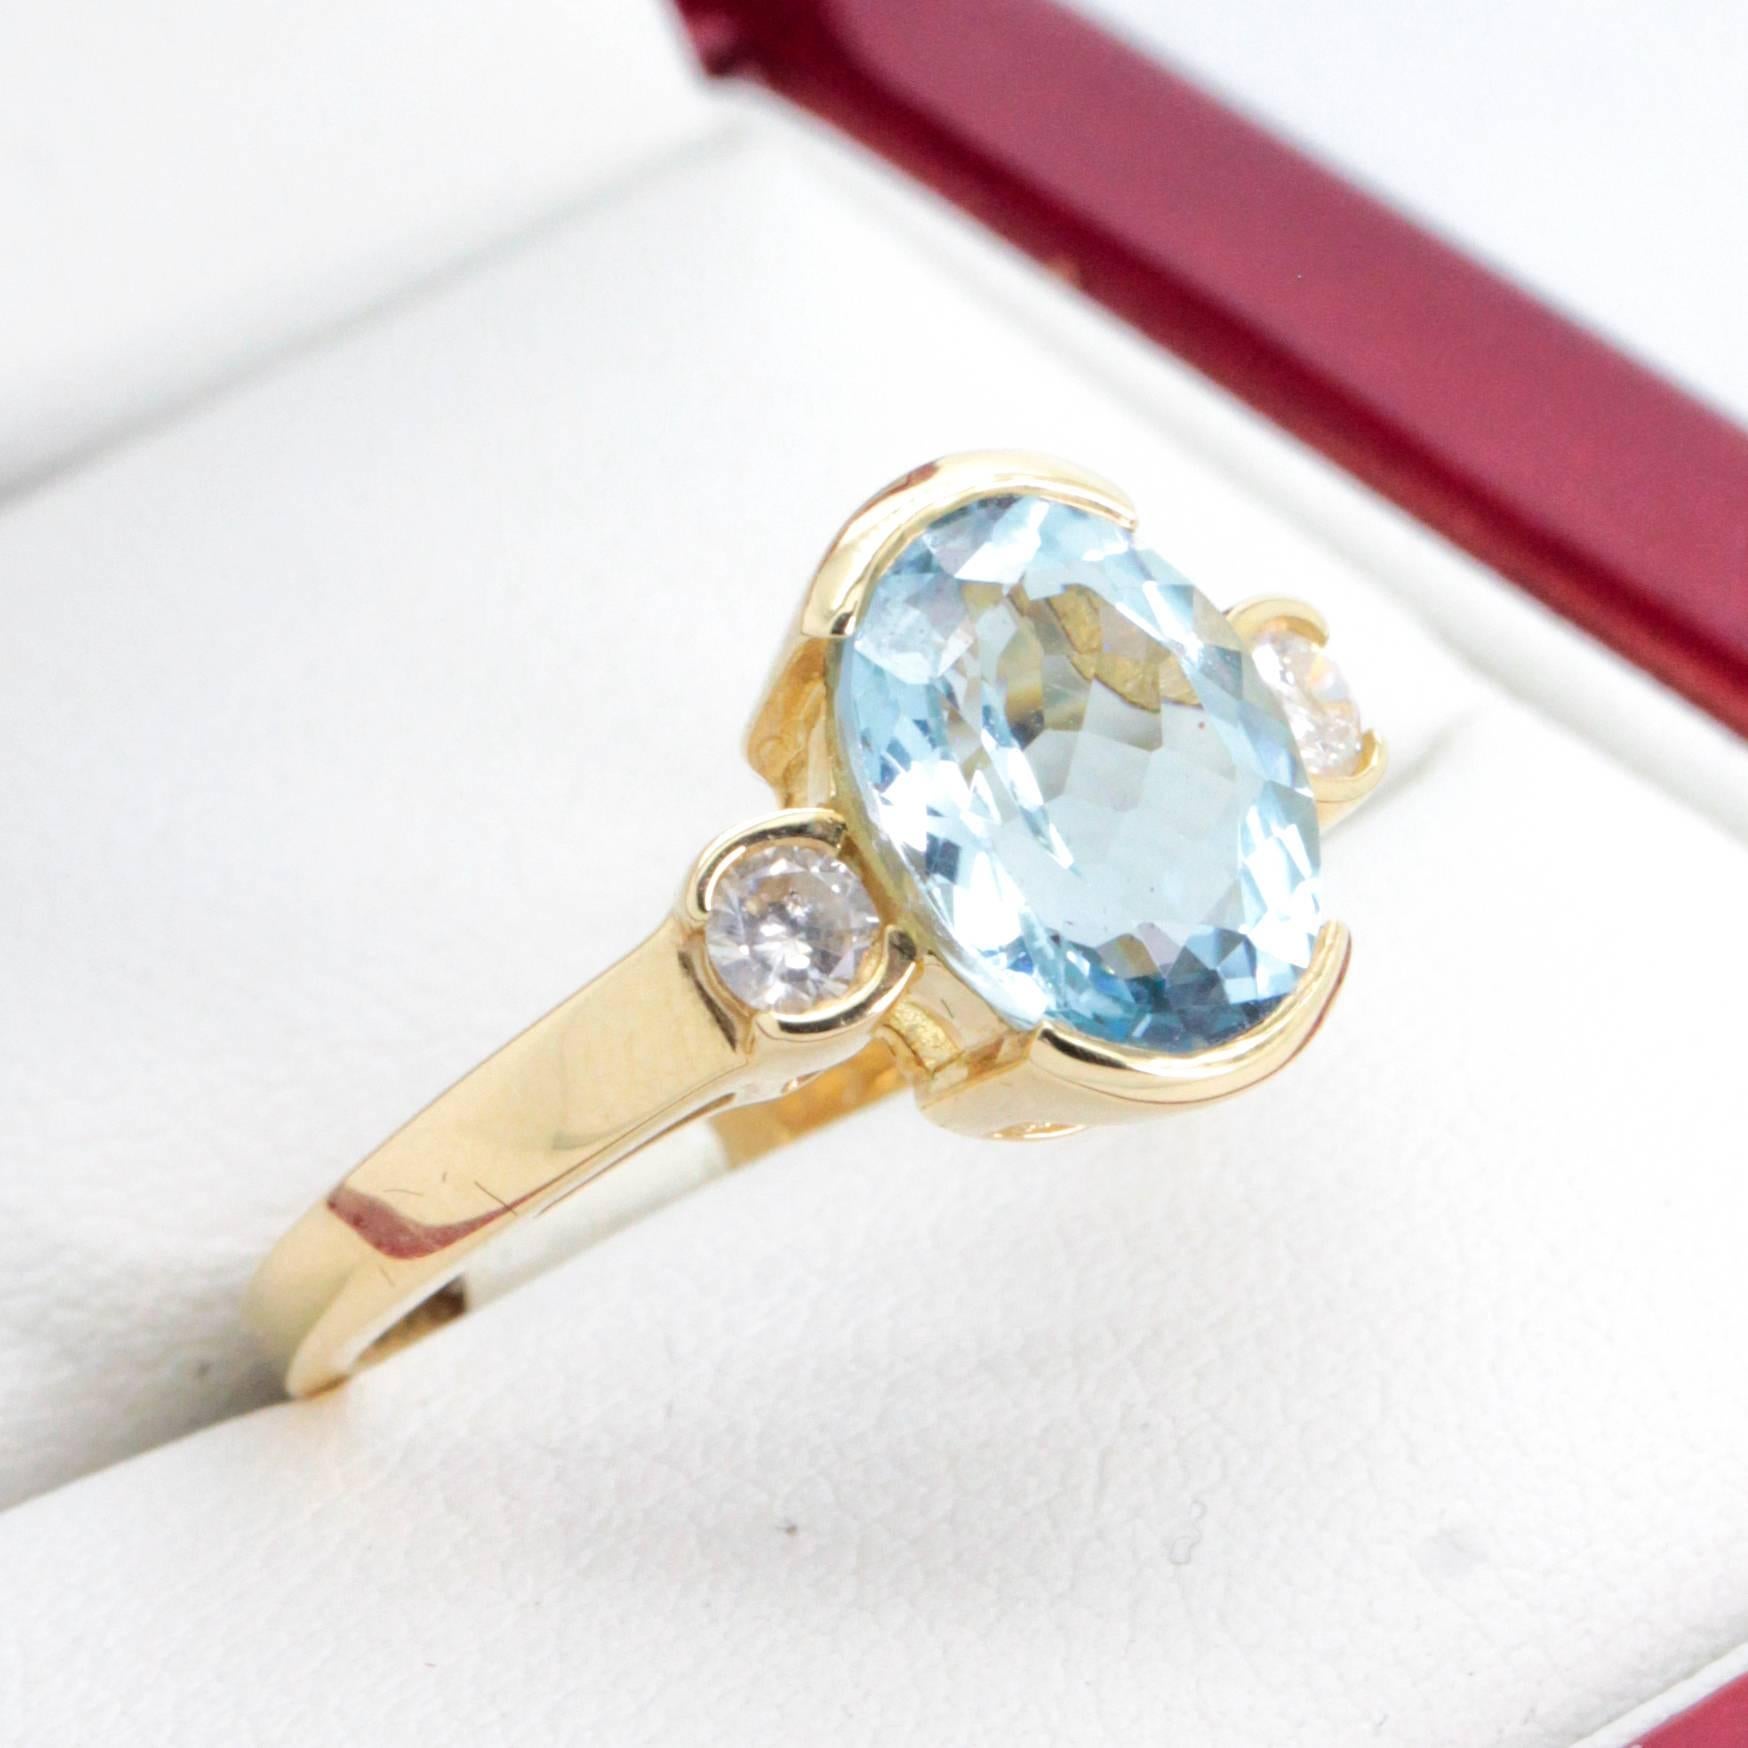 Aquamarine Diamond Engagement or Cocktail Ring In Excellent Condition For Sale In Sydney CBD, AU